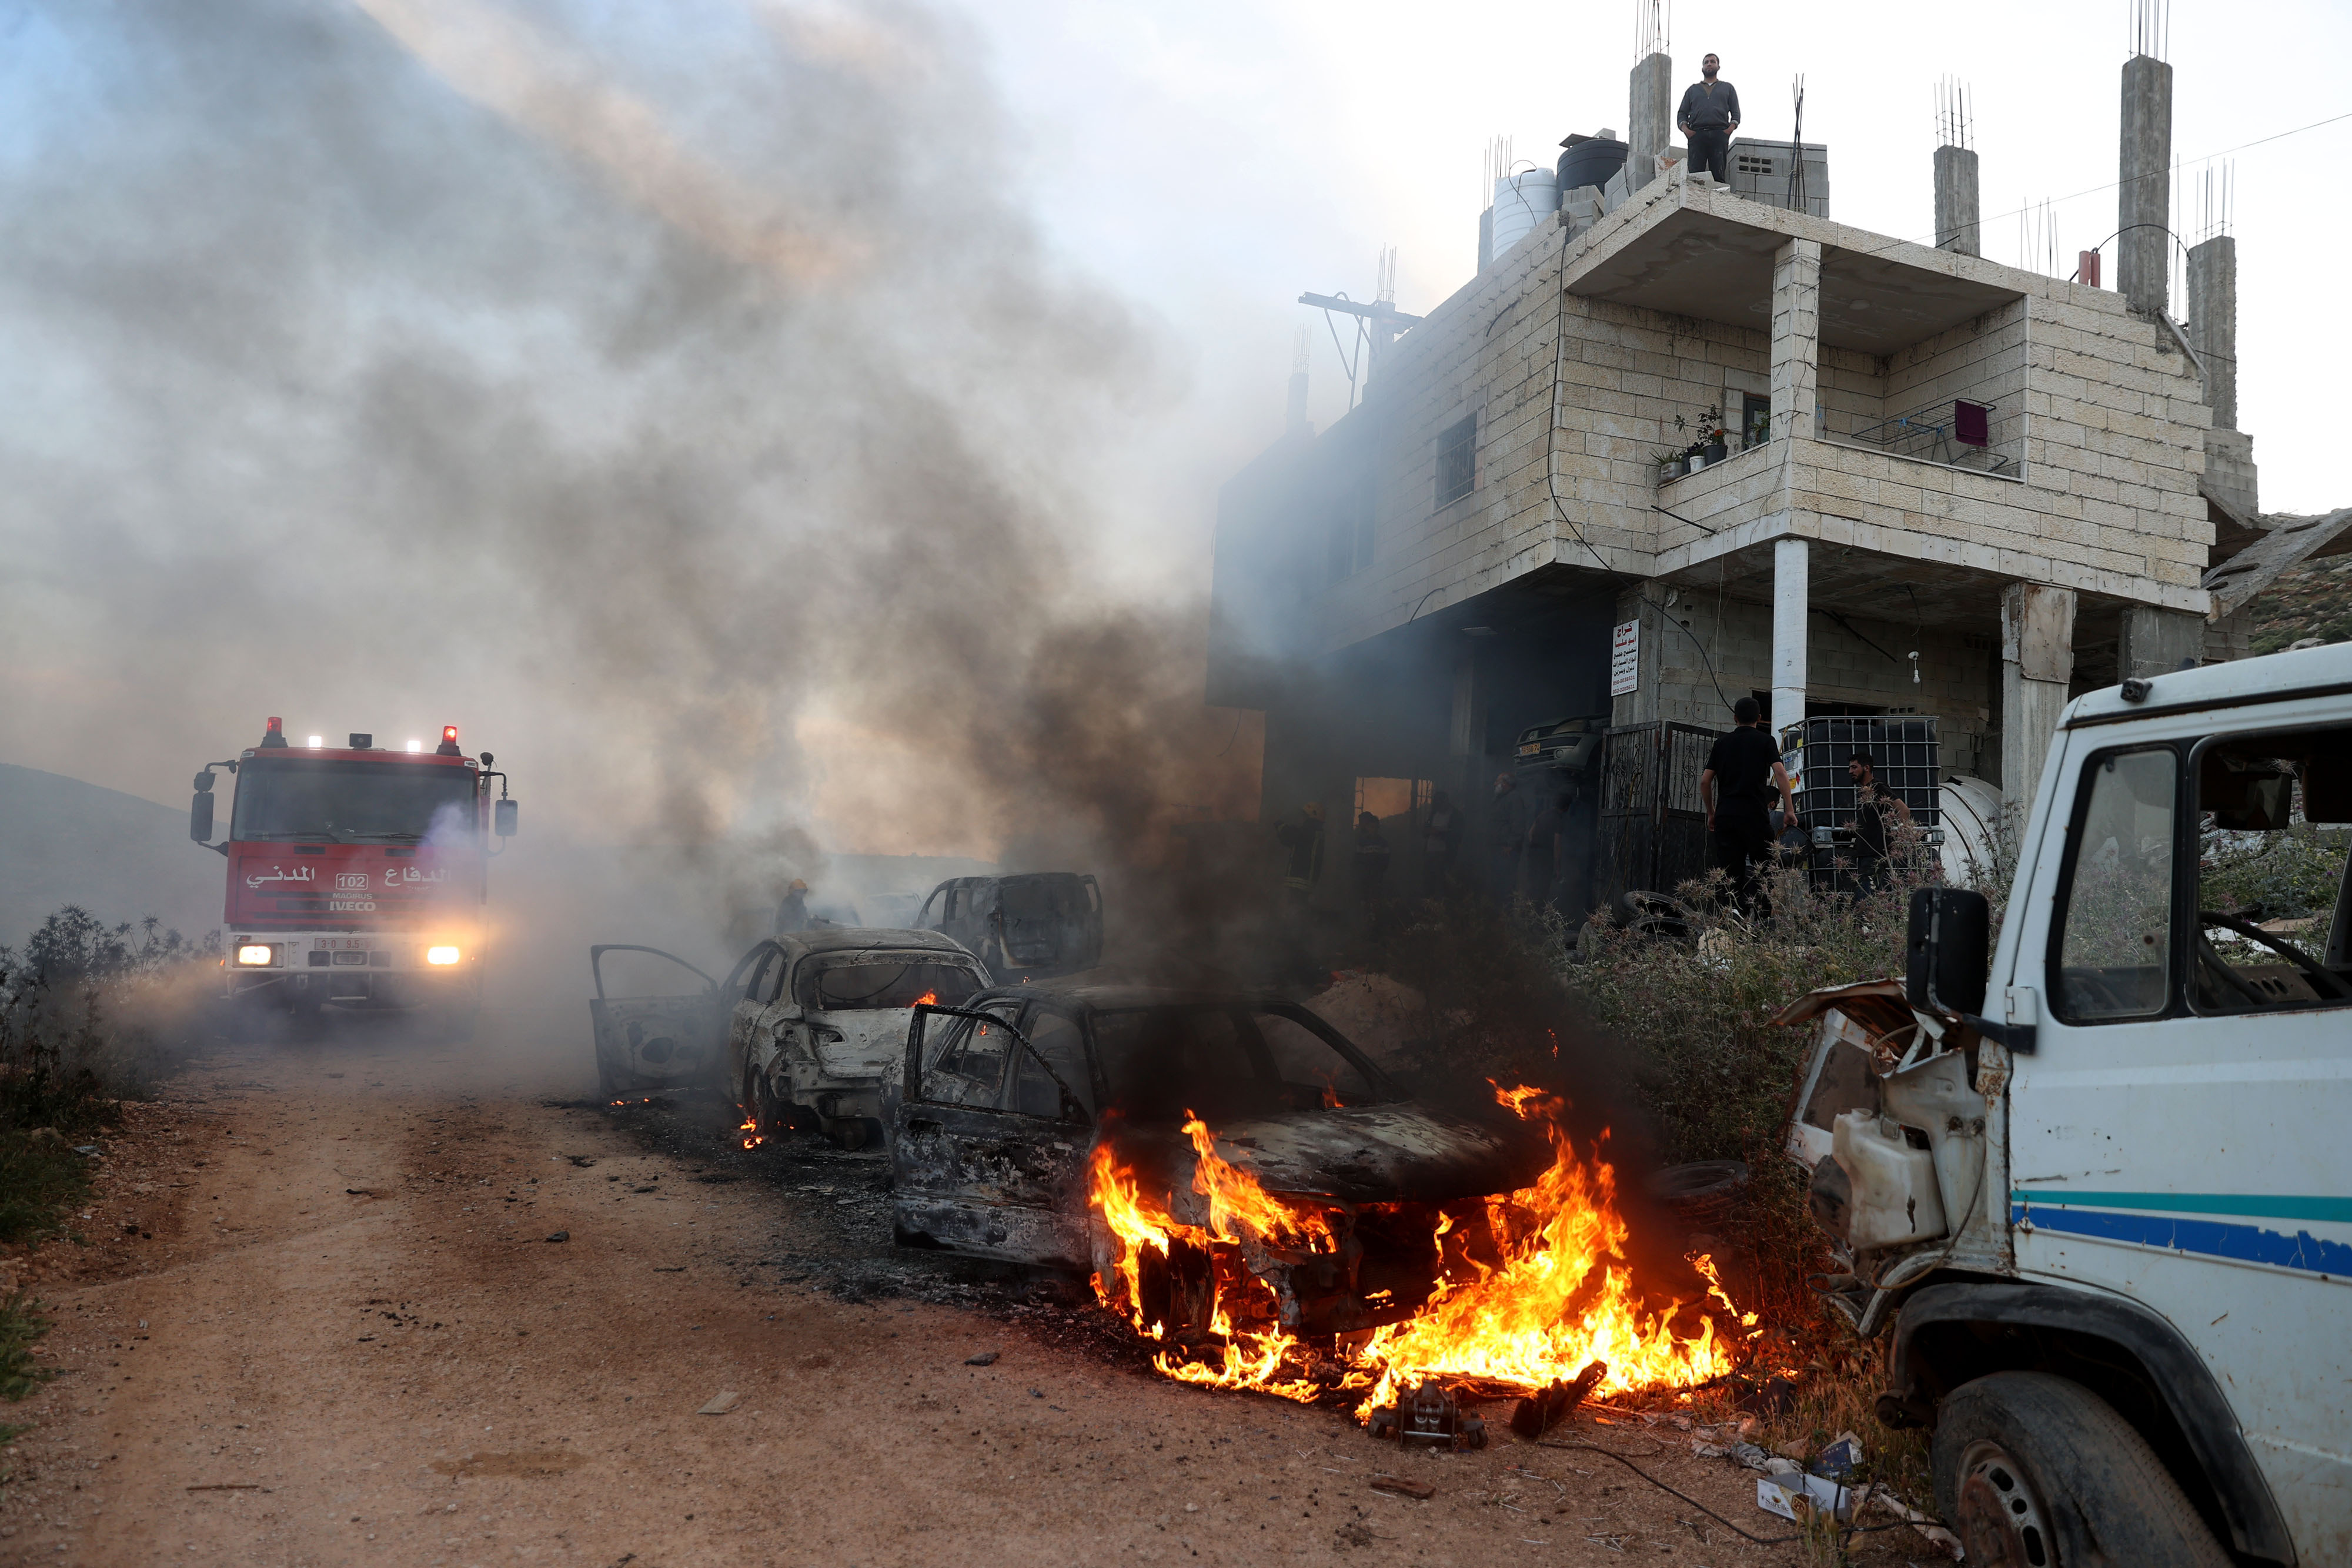 A view of damaged houses and burning vehicles after a raid by Israeli settlers on a town near Ramallah, West Bank on April 12.